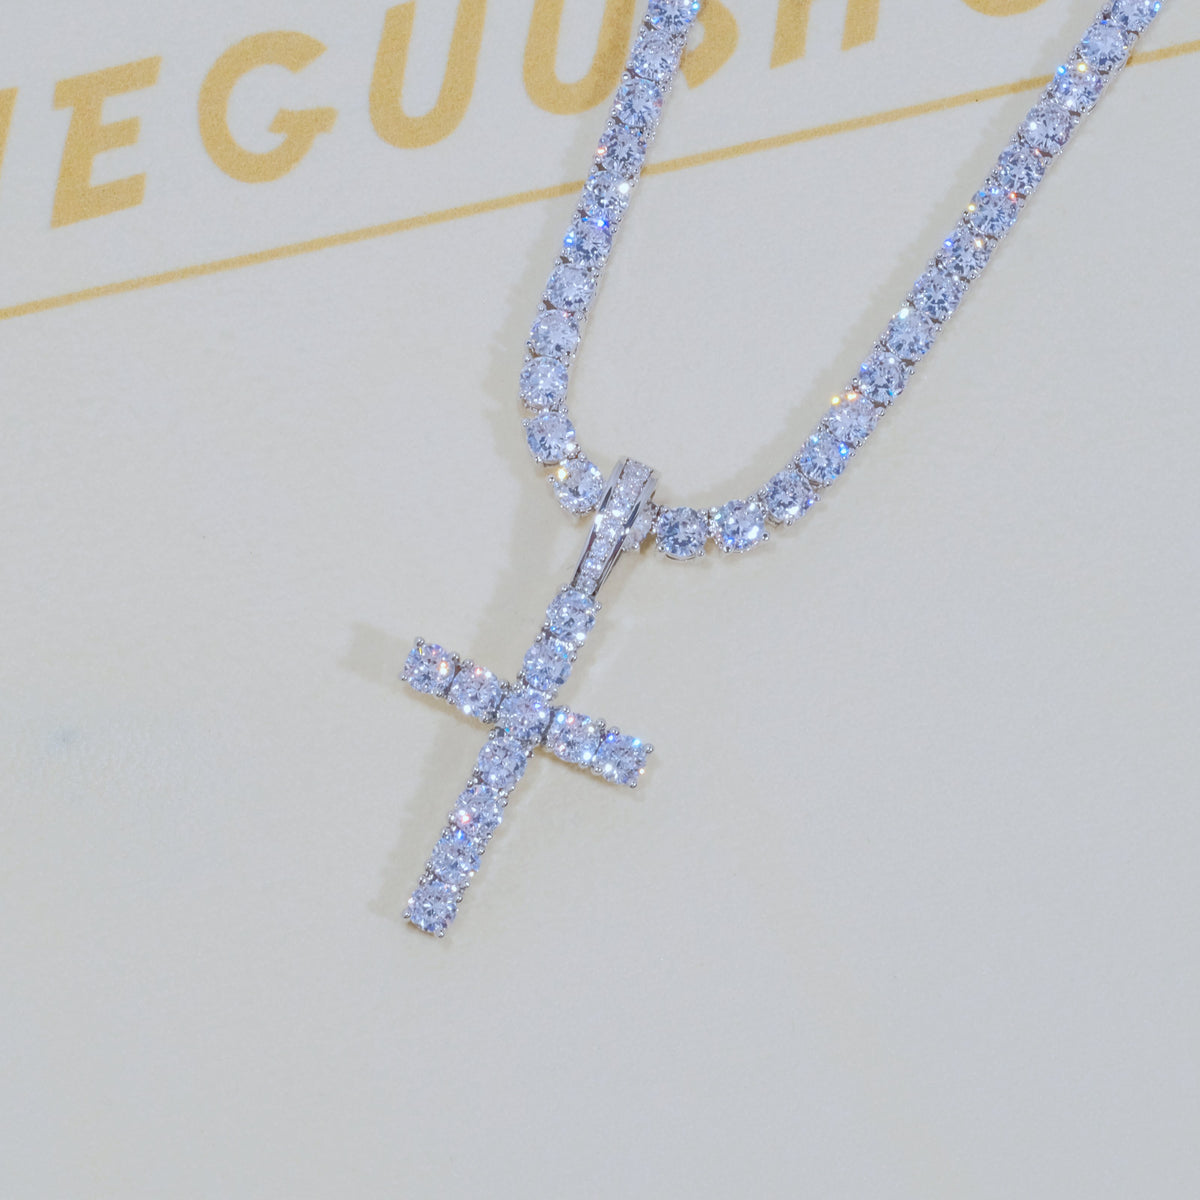 5MM UPSIDE DOWN CROSS TENNIS NECKLACE IN 18K WHITE GOLD-UP TO 50% OFF,FREE  SHIPPING ZUUKING